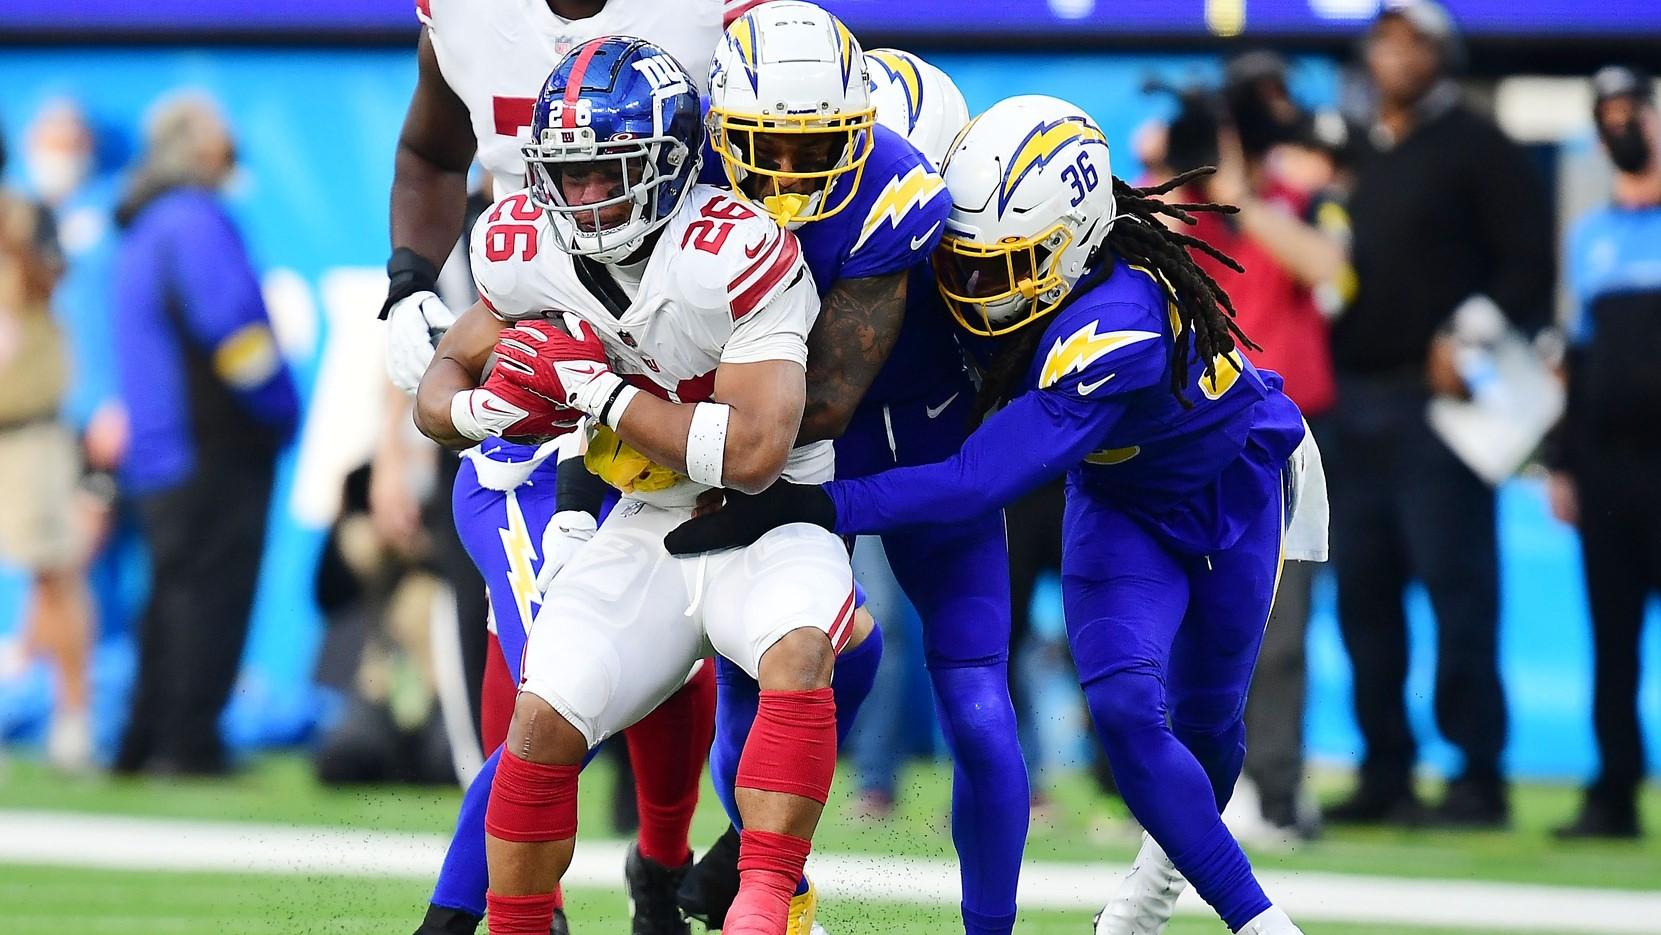 Dec 12, 2021; Inglewood, California, USA; New York Giants running back Saquon Barkley (26) is stopped by Los Angeles Chargers defensive back Trey Marshall (36) and the defense during the first half at SoFi Stadium. / Gary A. Vasquez-USA TODAY Sports